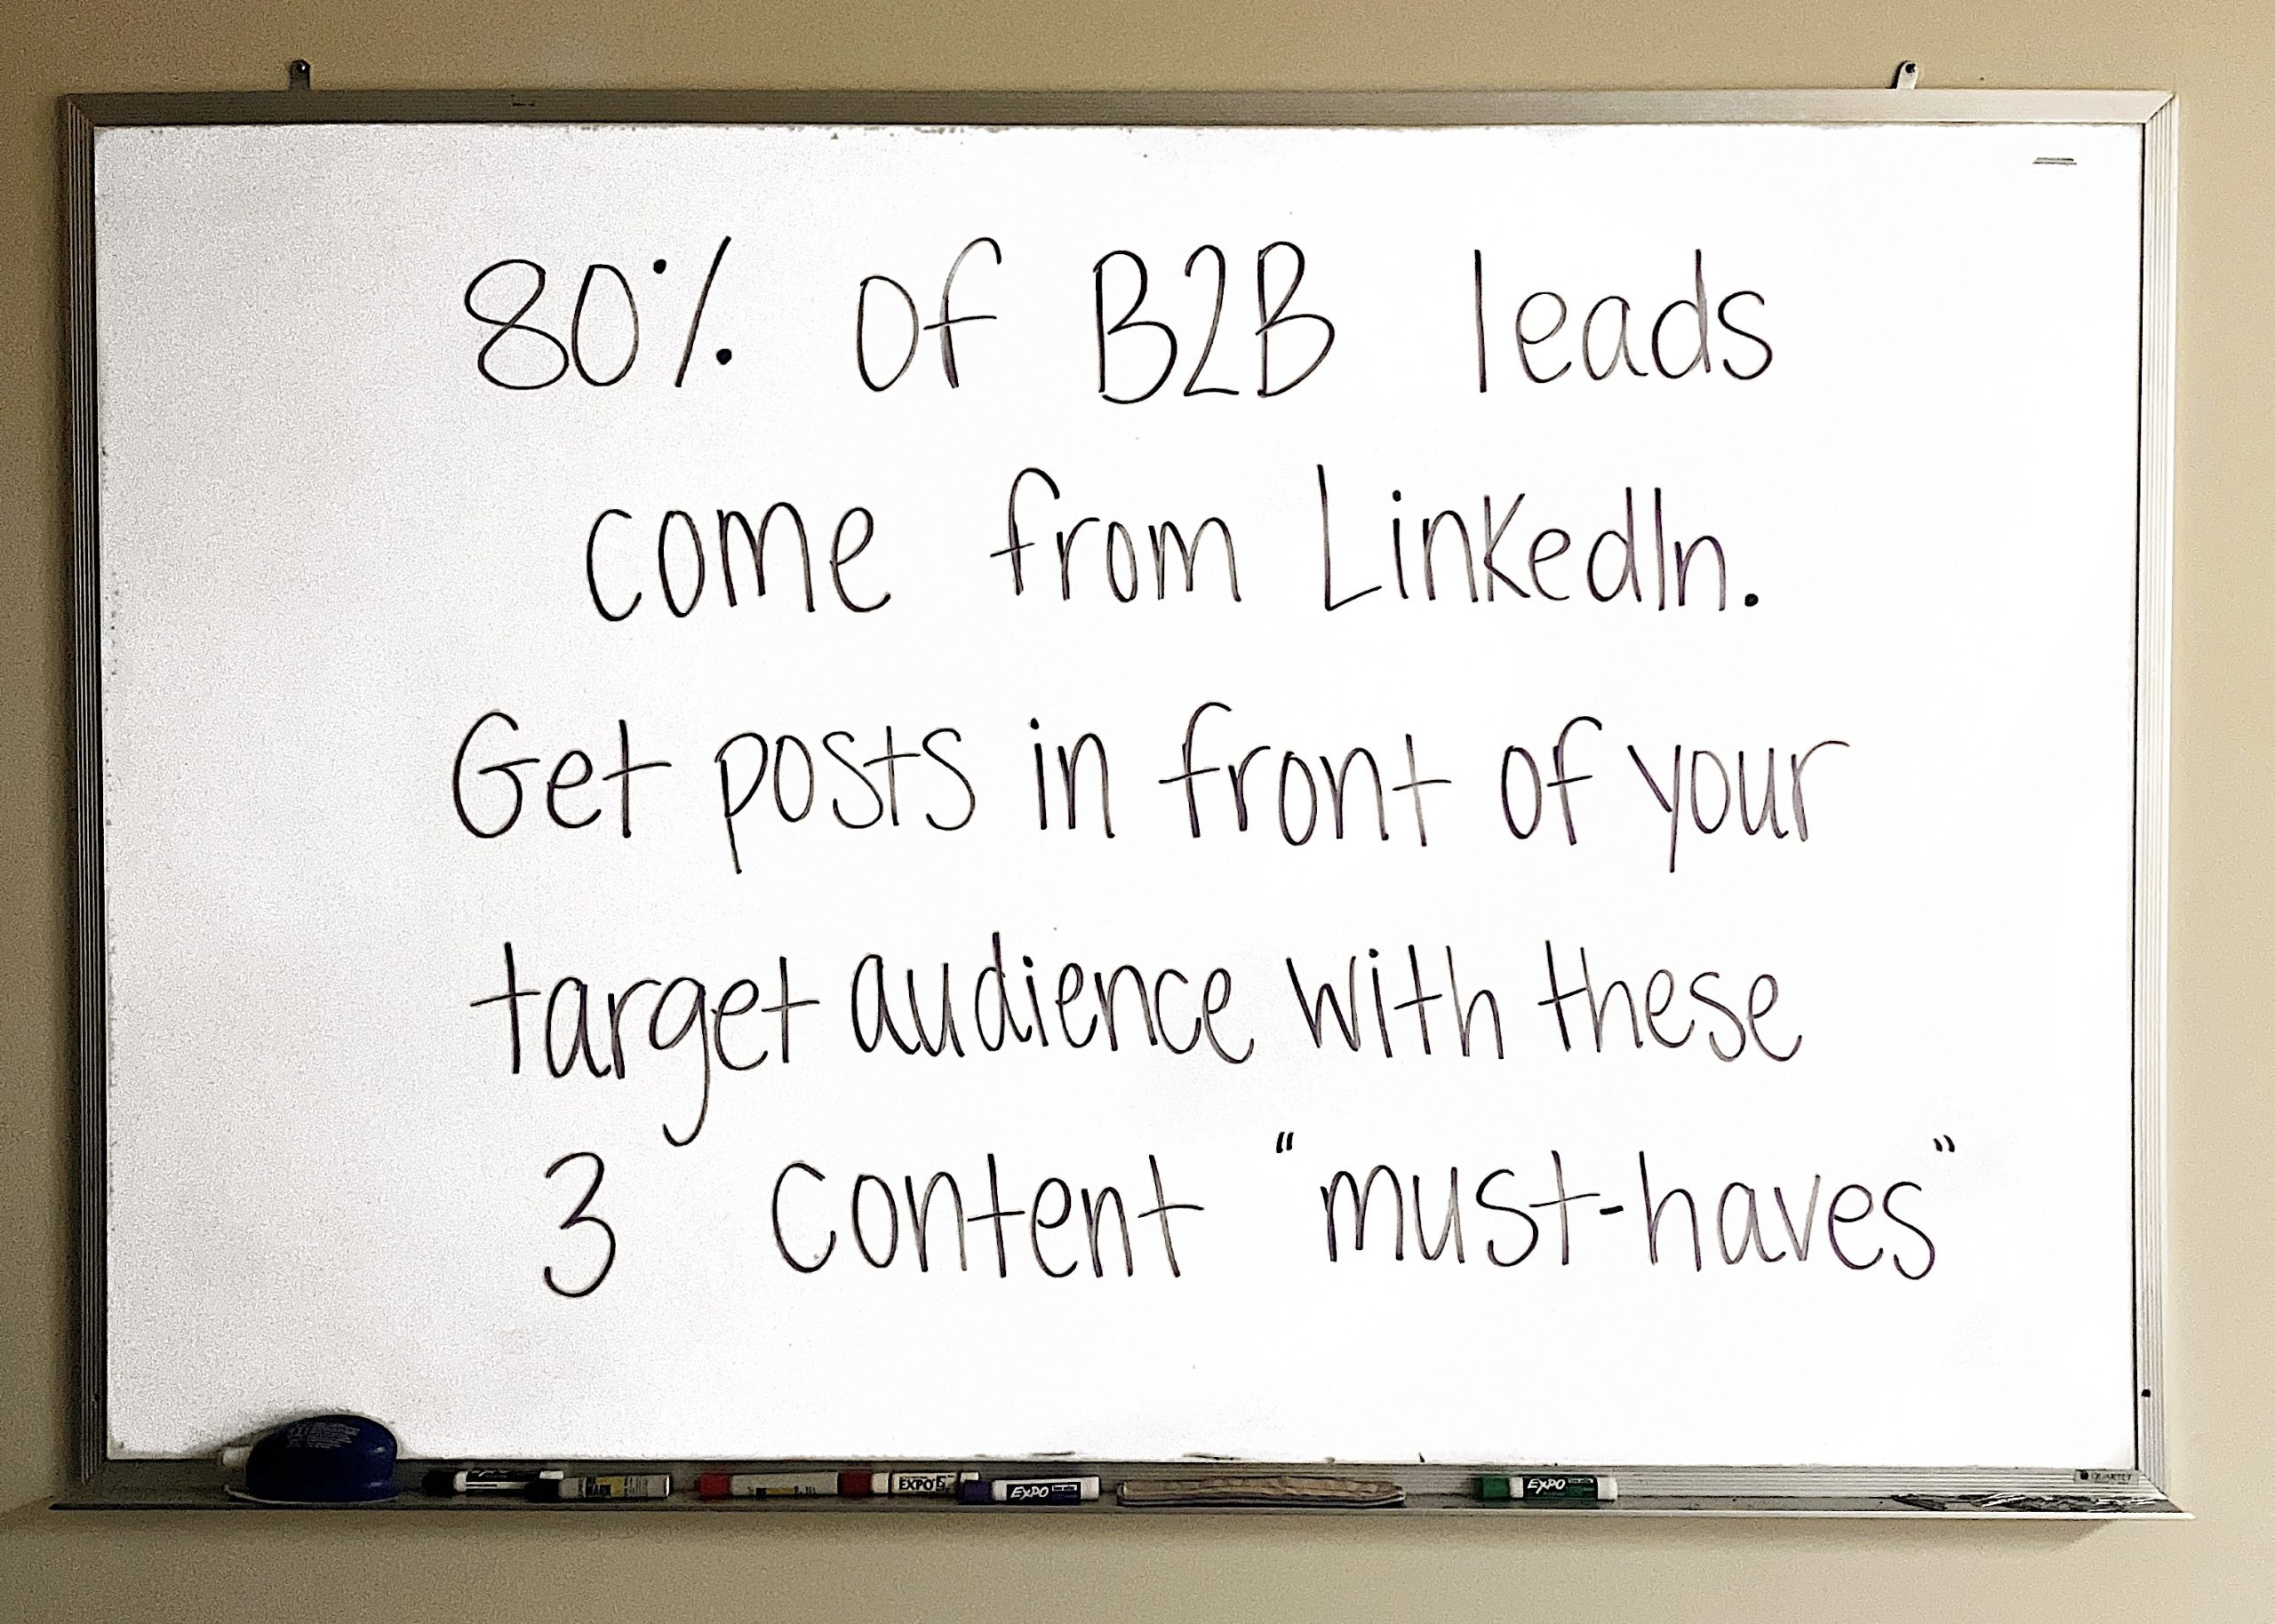 (White) Board Meeting: Digging Into LinkedIn to Get More Leads